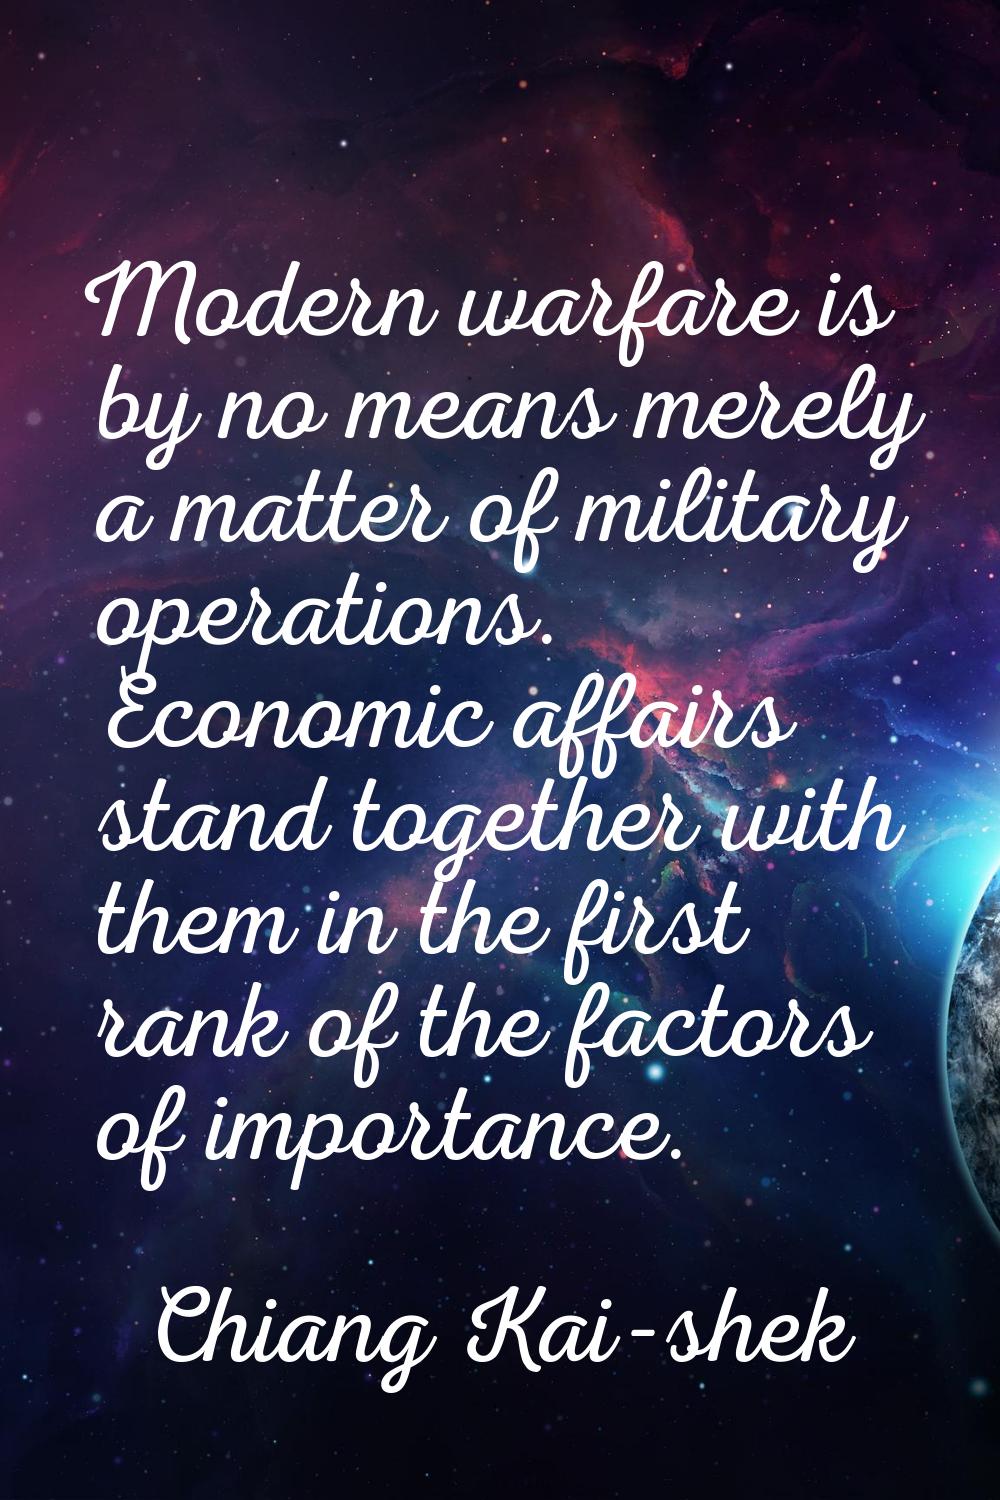 Modern warfare is by no means merely a matter of military operations. Economic affairs stand togeth